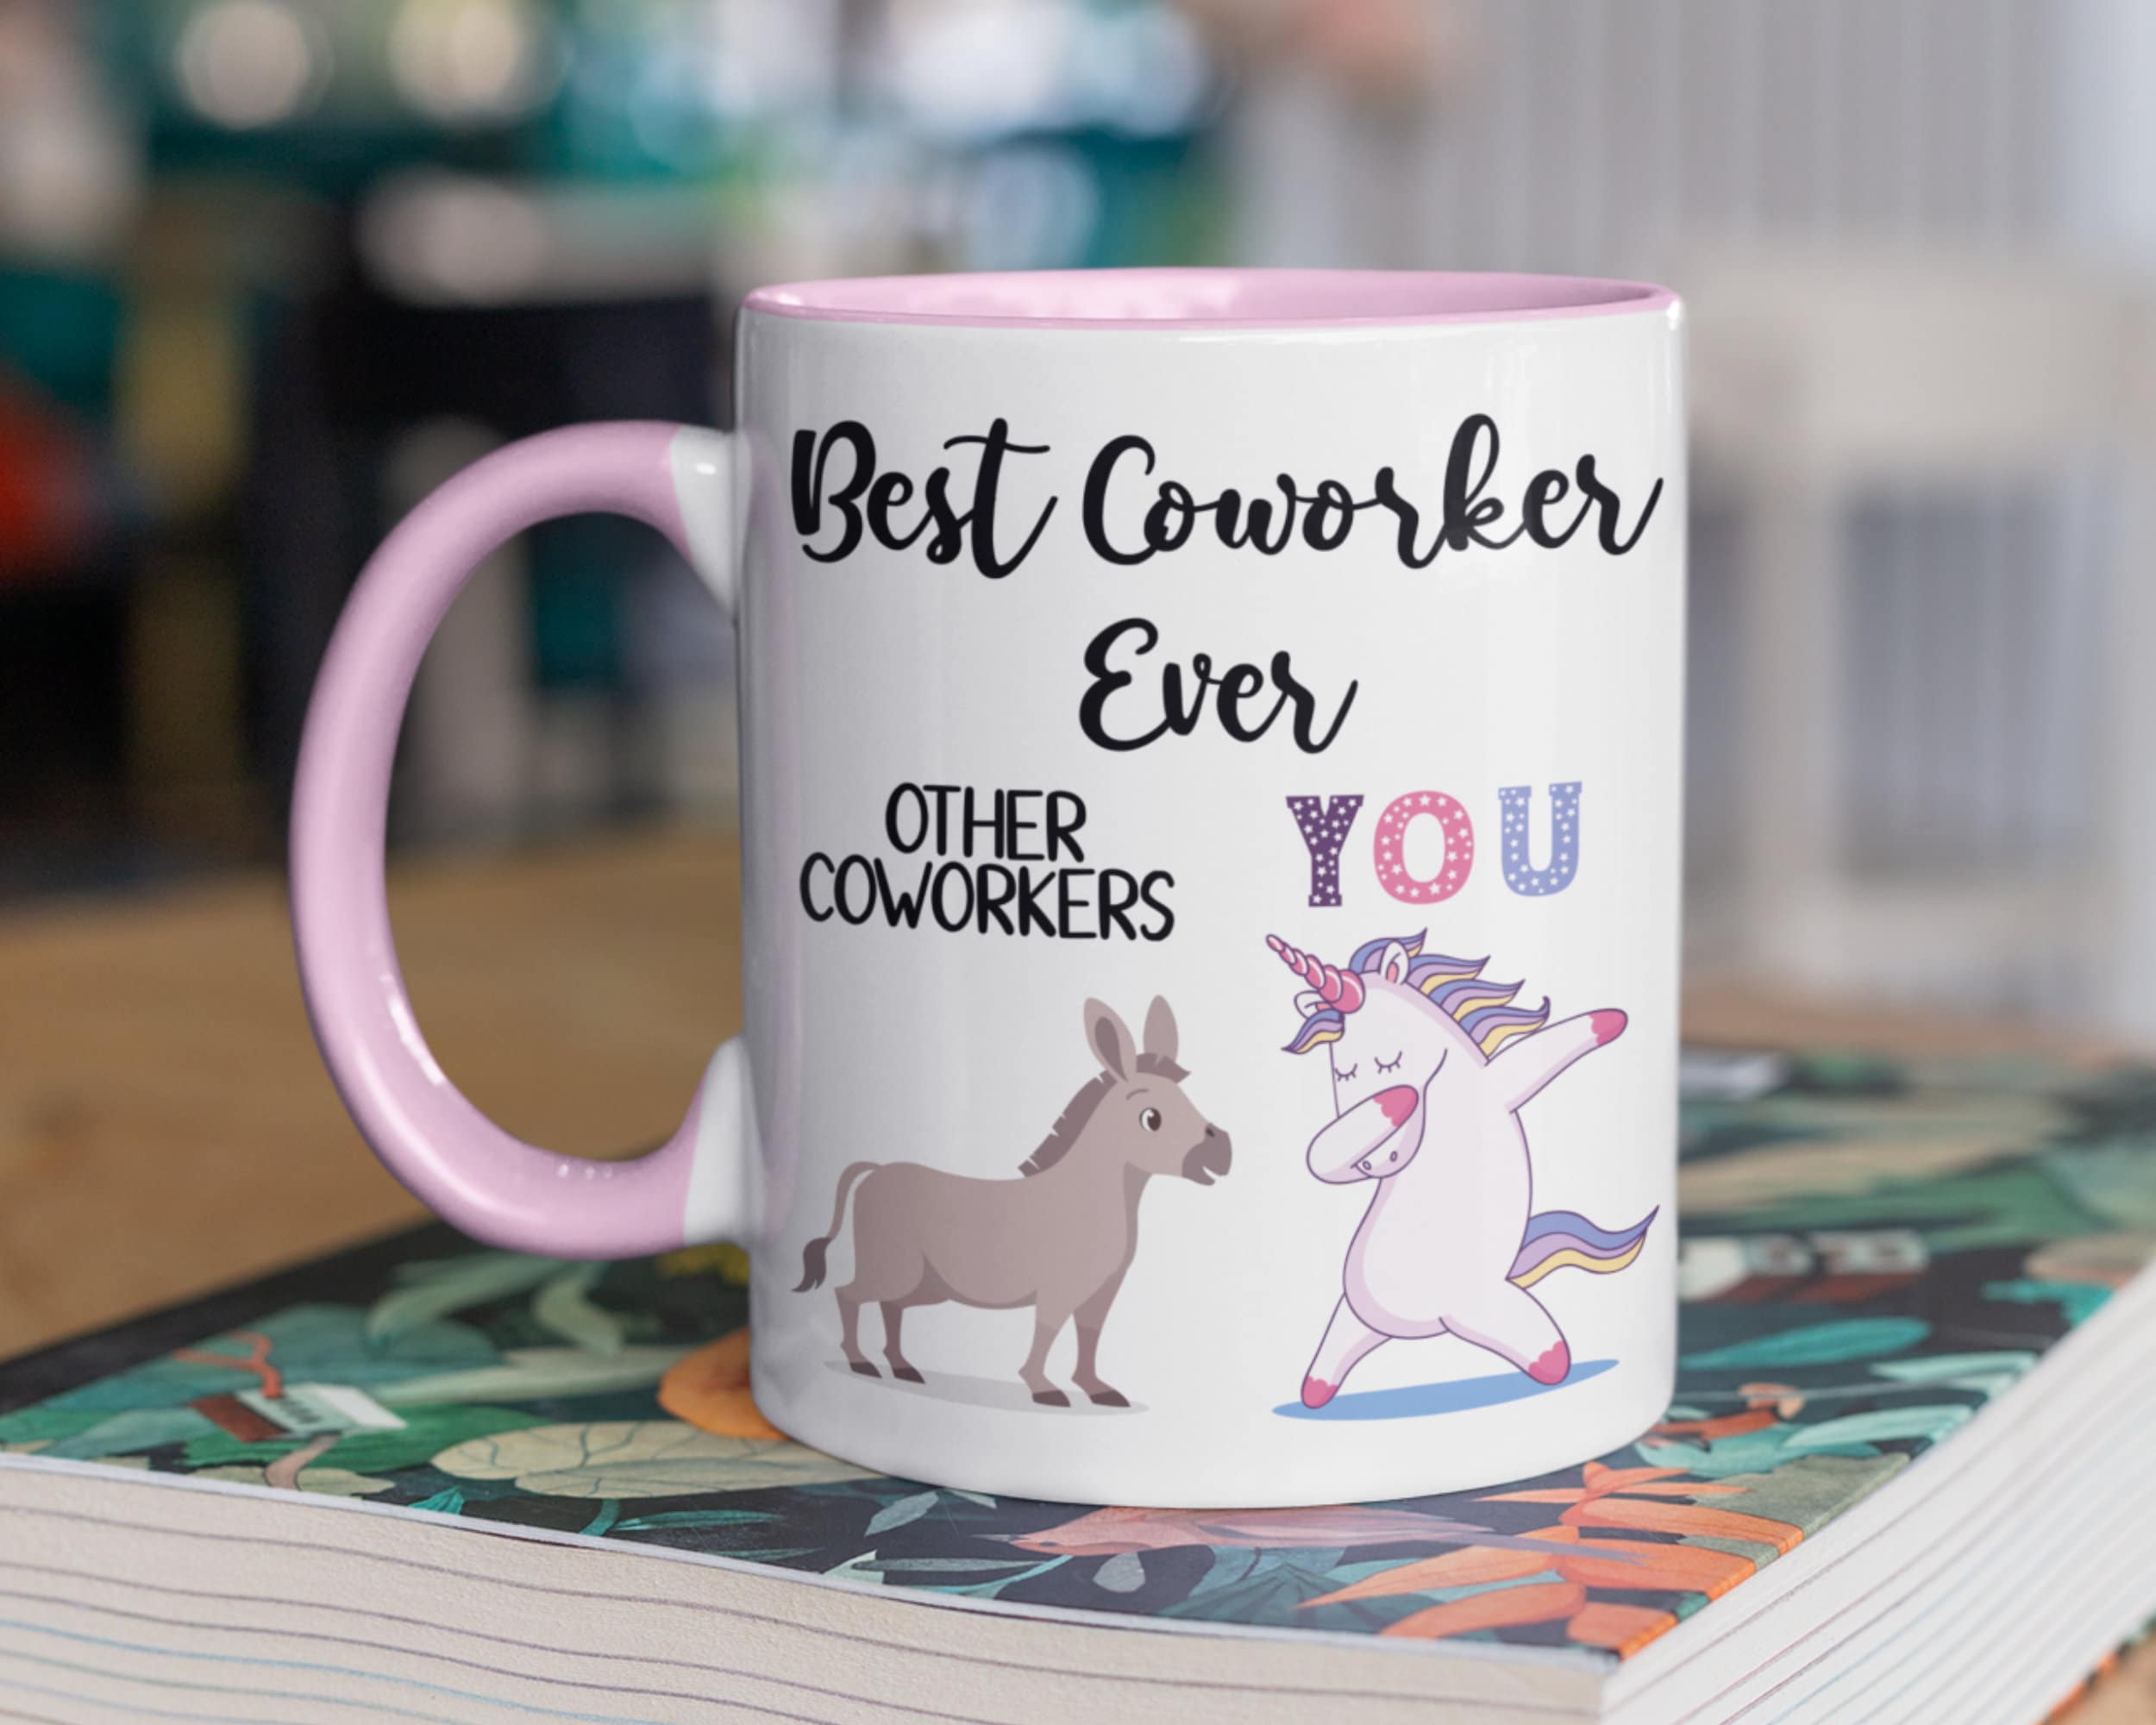 Unicorn City Planning Aide Other Me Funny Gift for Coworker Women